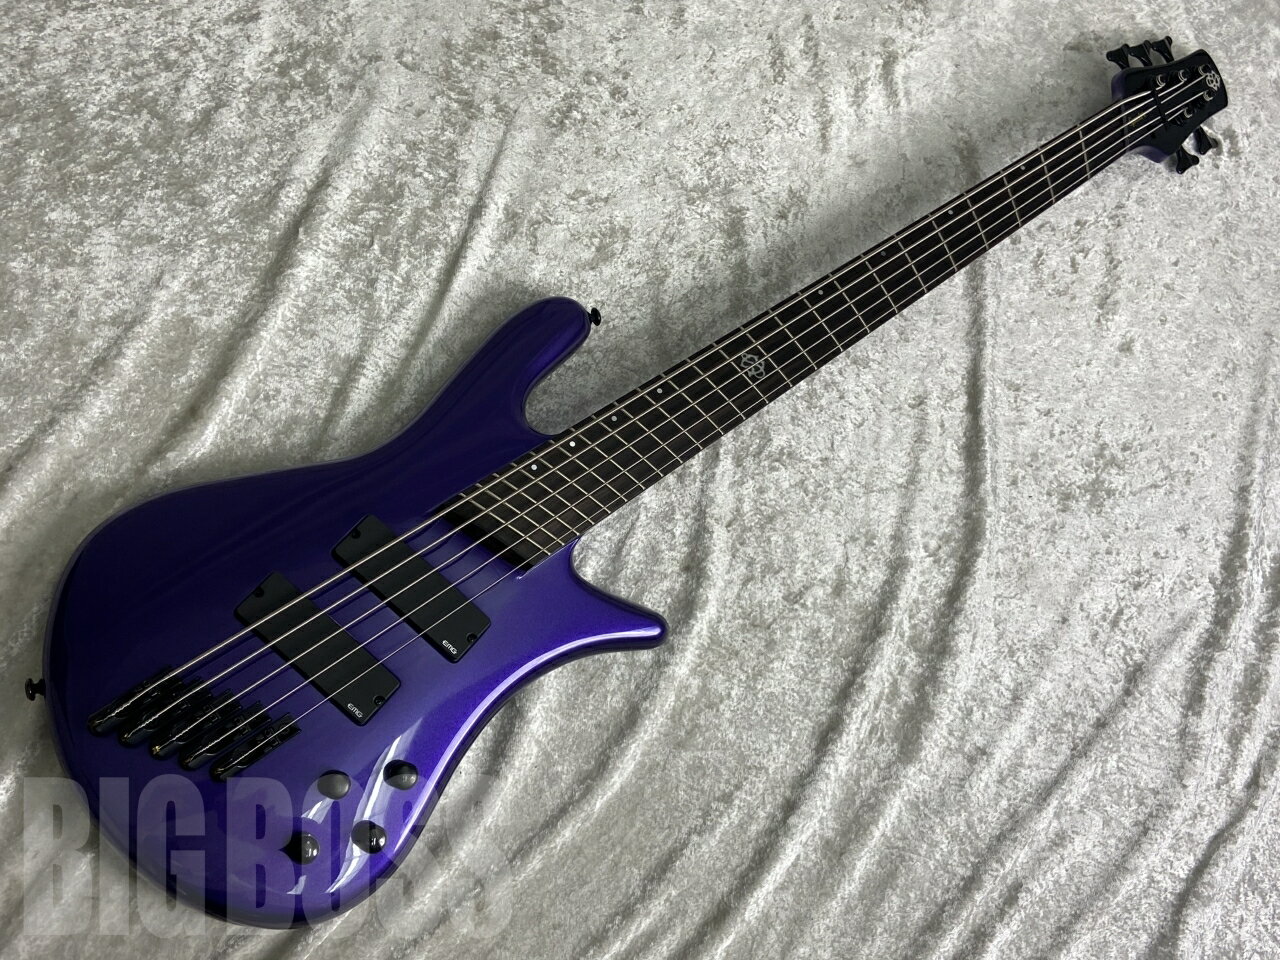 Spector NS Dimension HP 5(Plum Crazy Gloss) [メンテナンス無料]【即納可能】